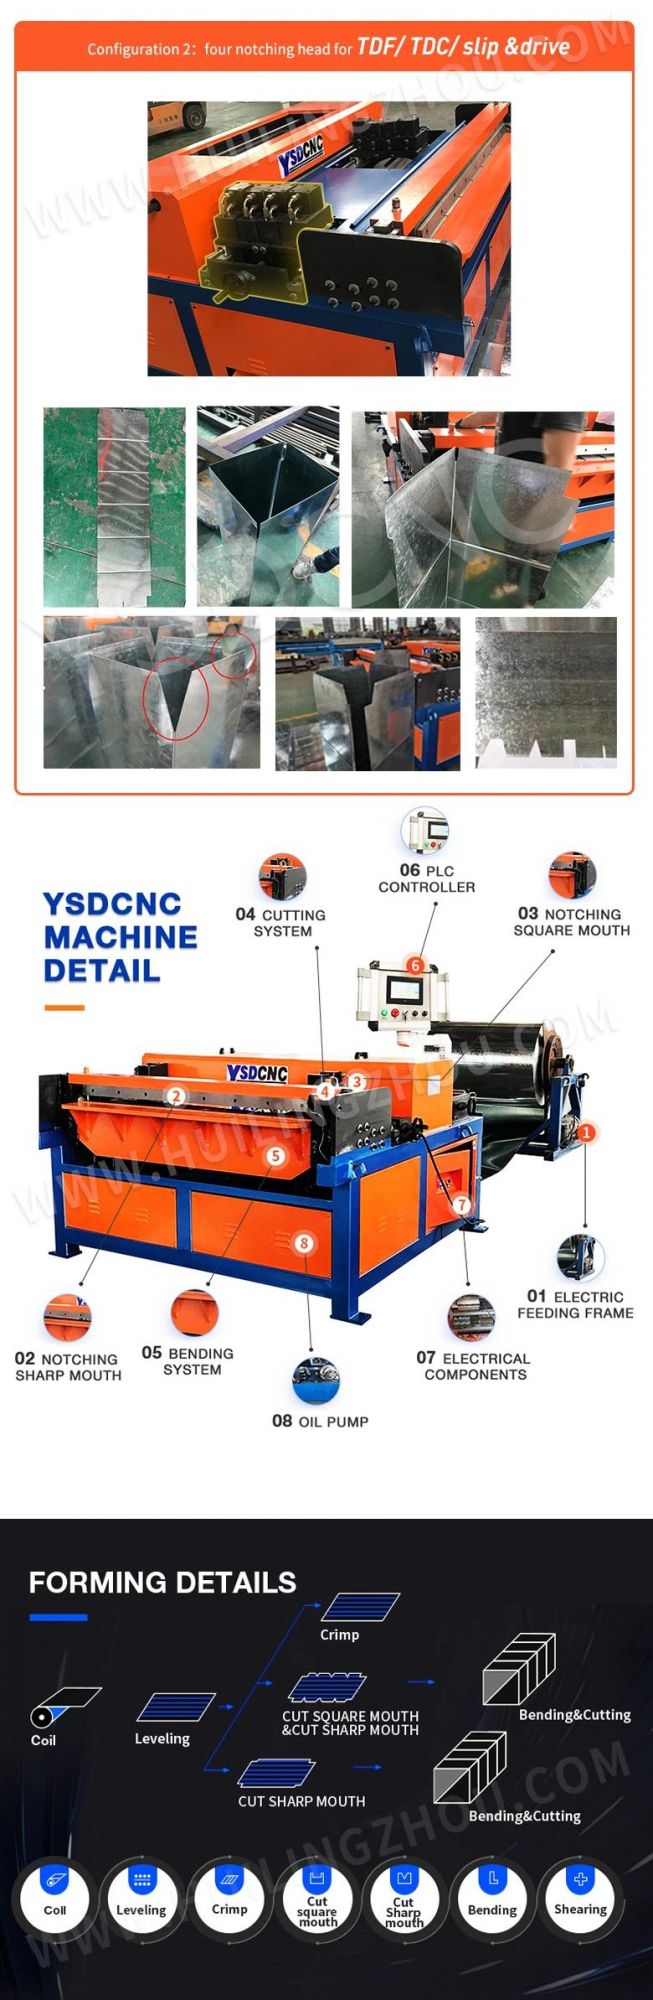 Factory Duct Manufacture Auto Line/Square Duct Auto Production Machines/Air Duct Lineii III IV